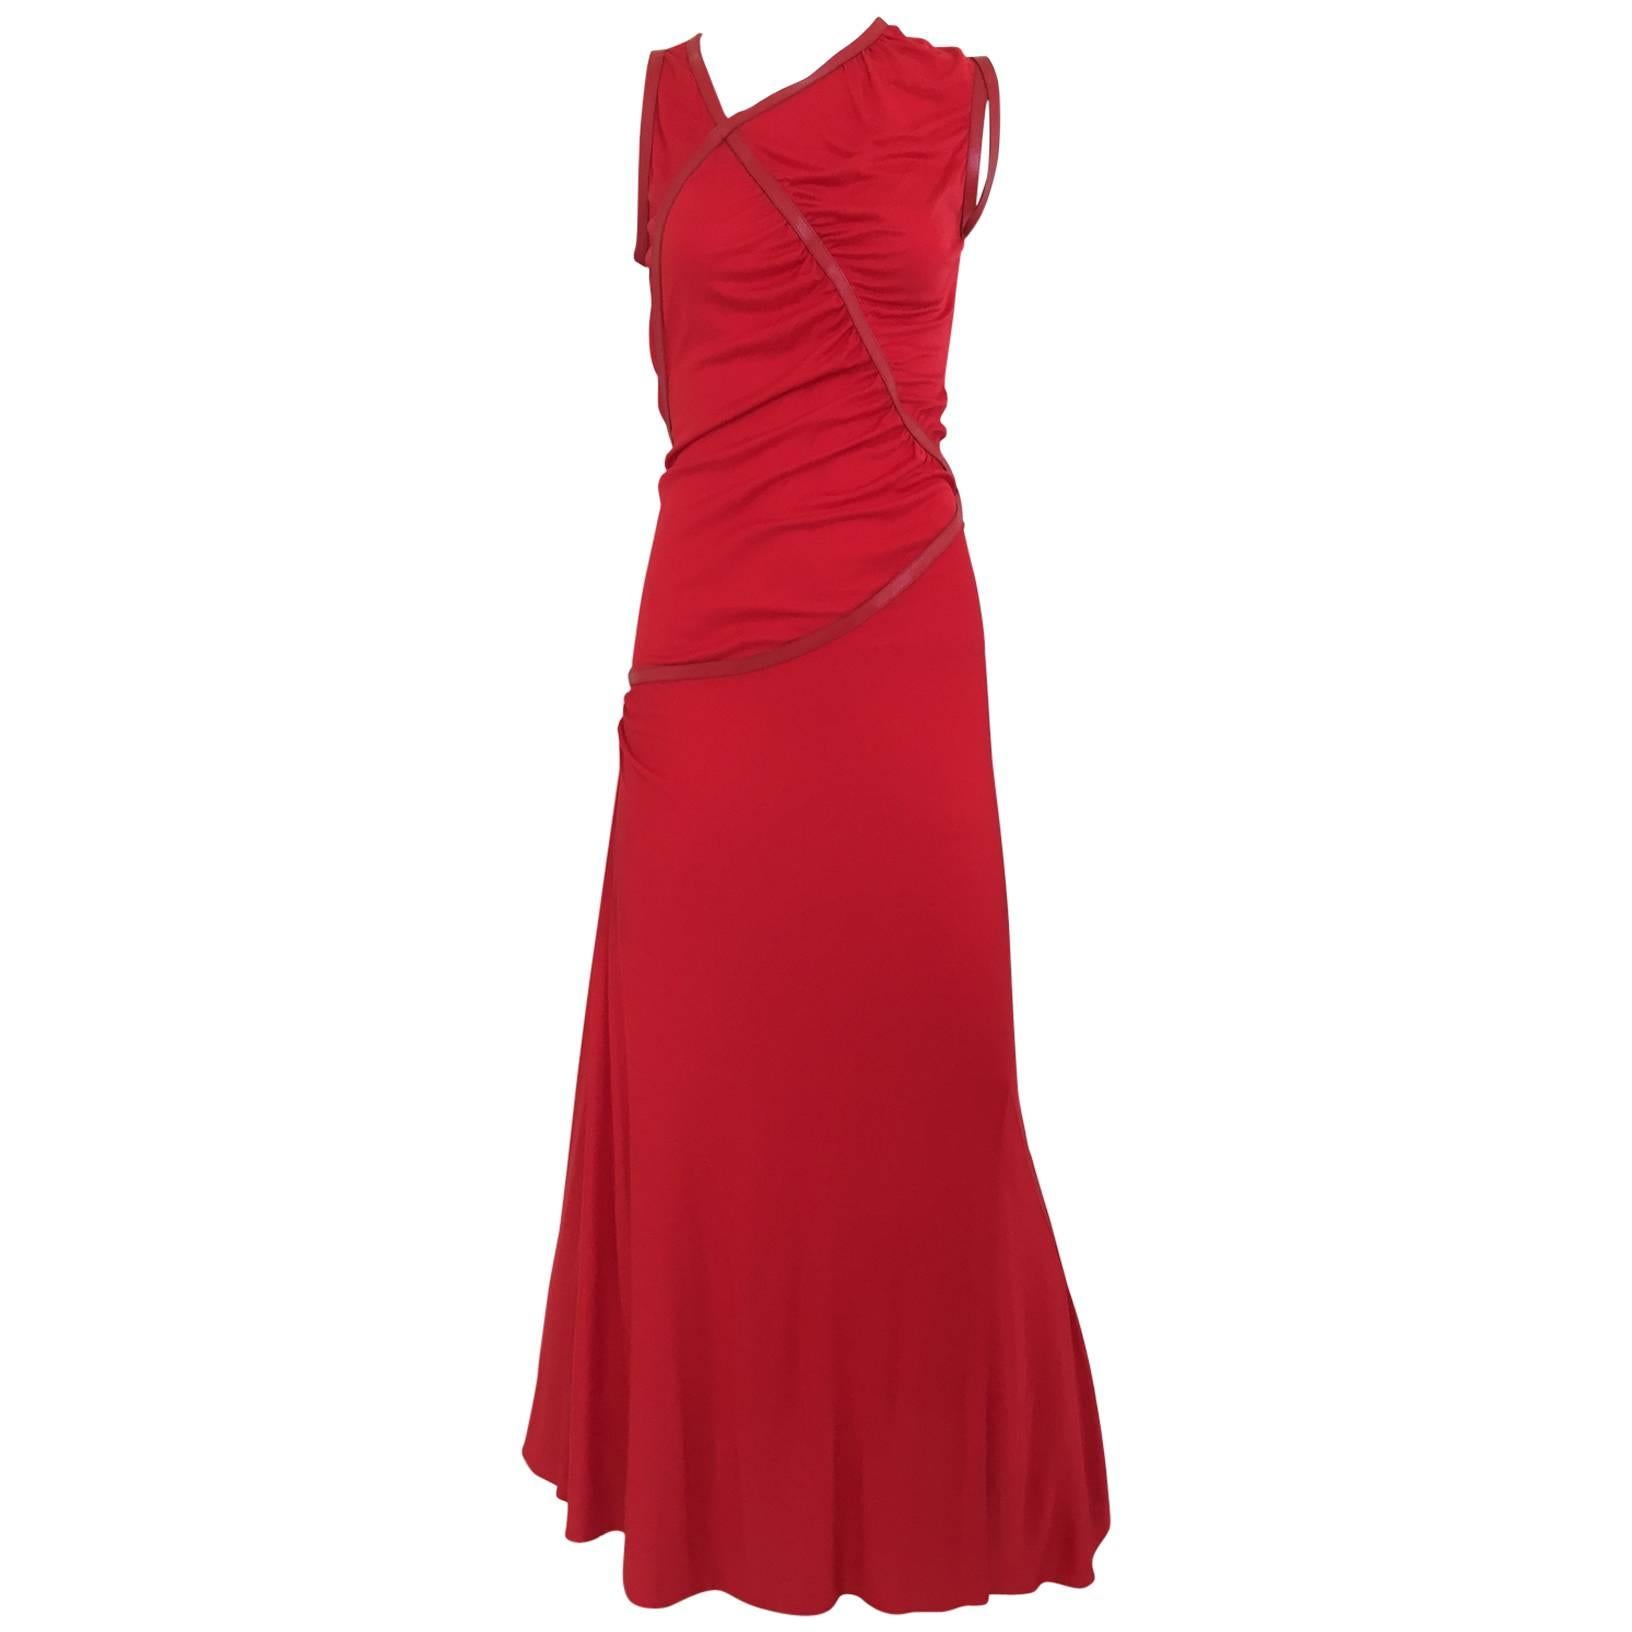 Sexy 2003 Alexander McQueen red jersey dress with leather trim